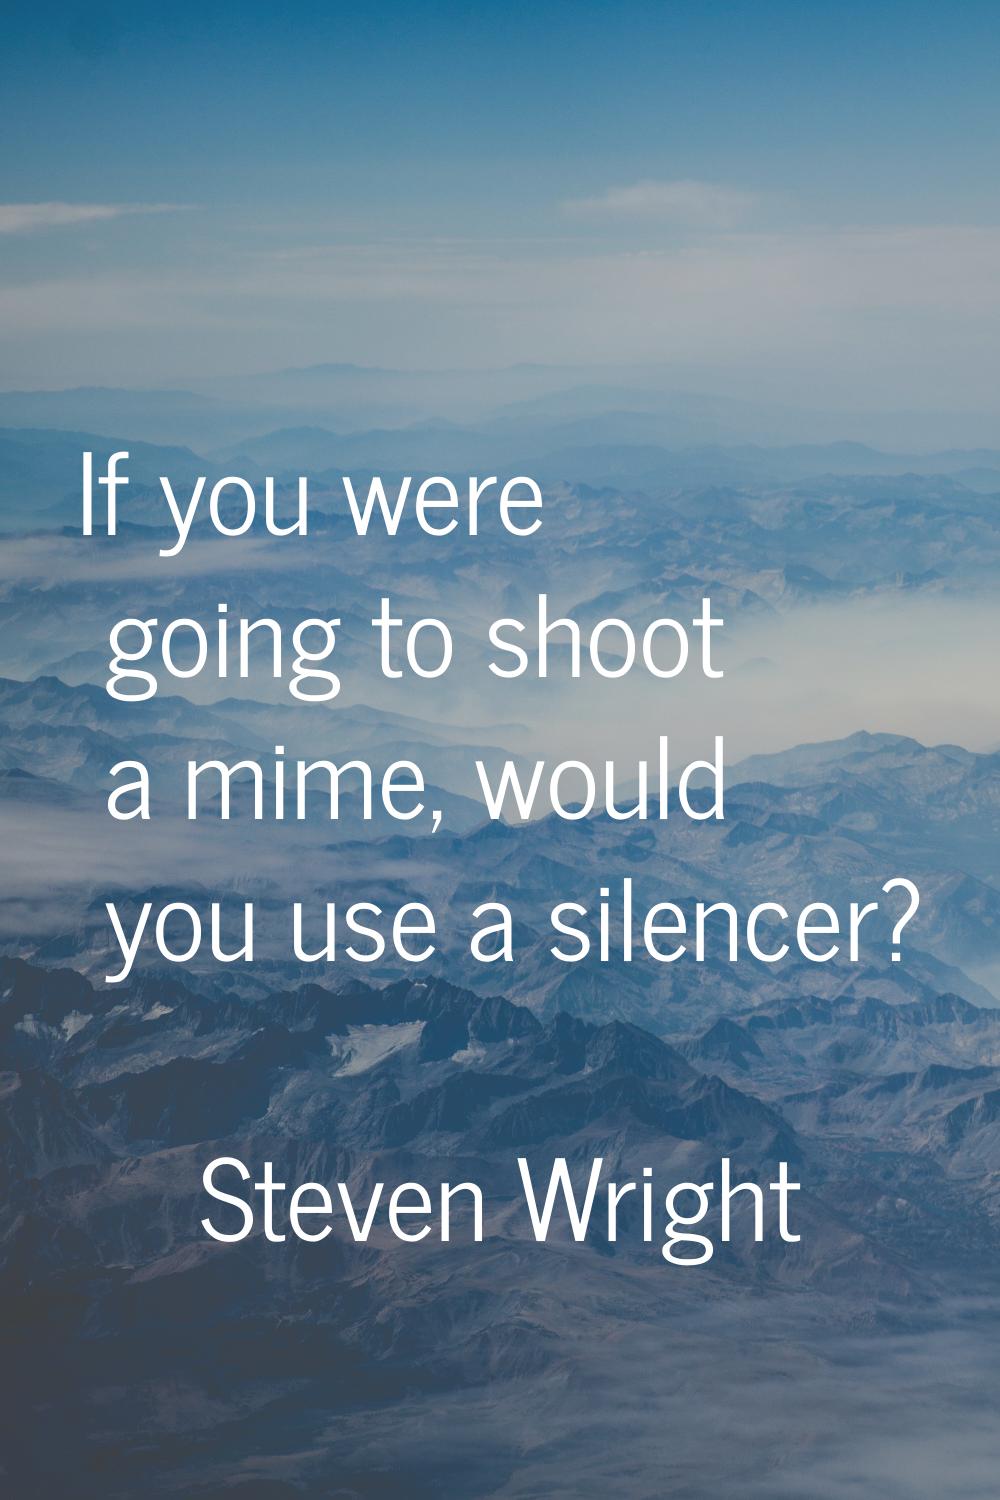 If you were going to shoot a mime, would you use a silencer?